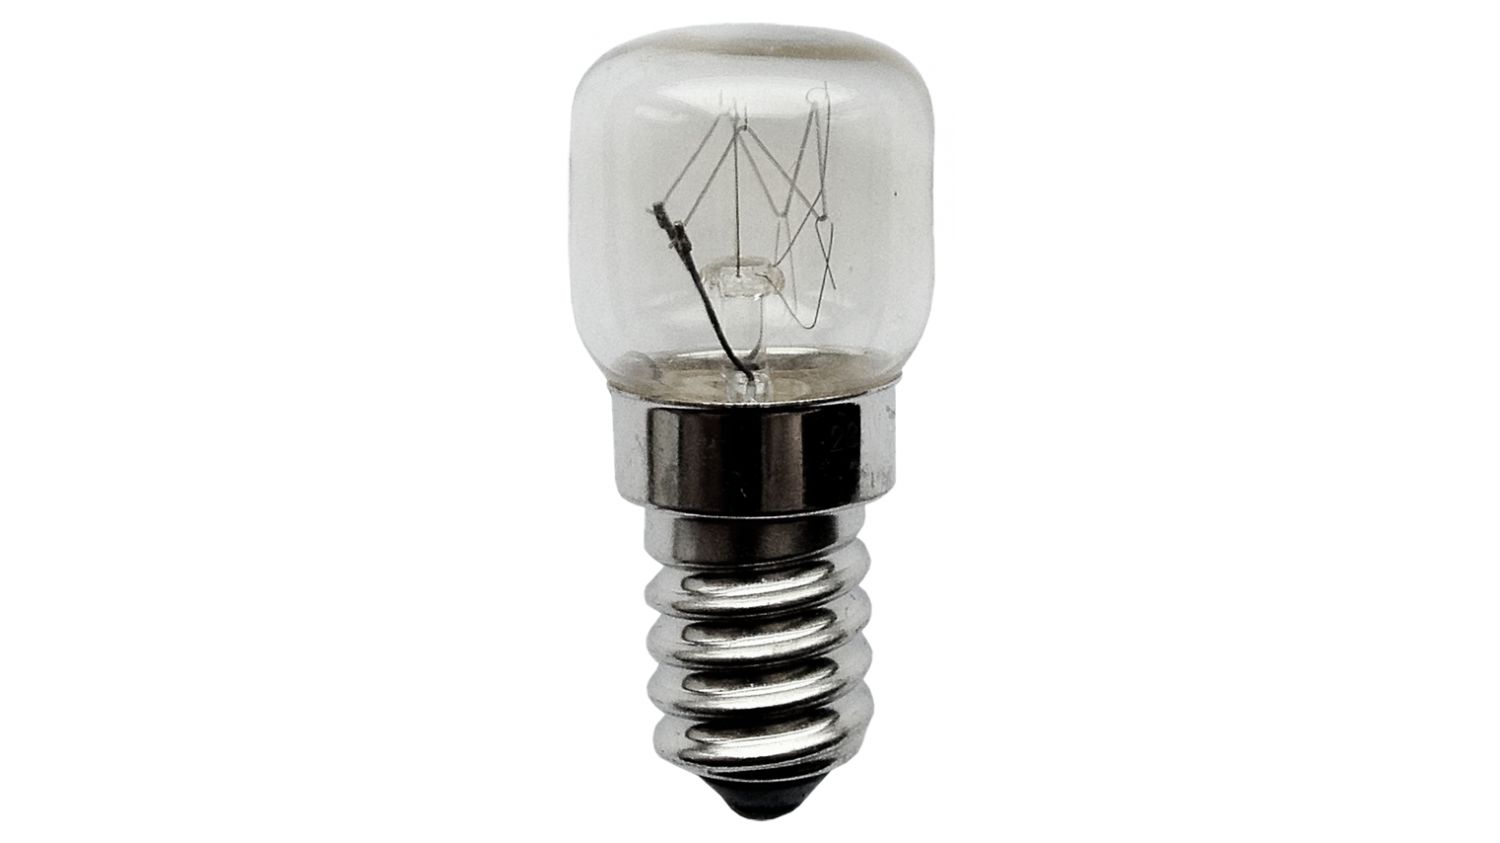 https://www.mygreenlighting.co.uk/images/products/white/12v-10w-tungsten-pygmy-bulb-e14-dimmable-clear-14240-1500x843-p9118-v1672844890_1.jpg